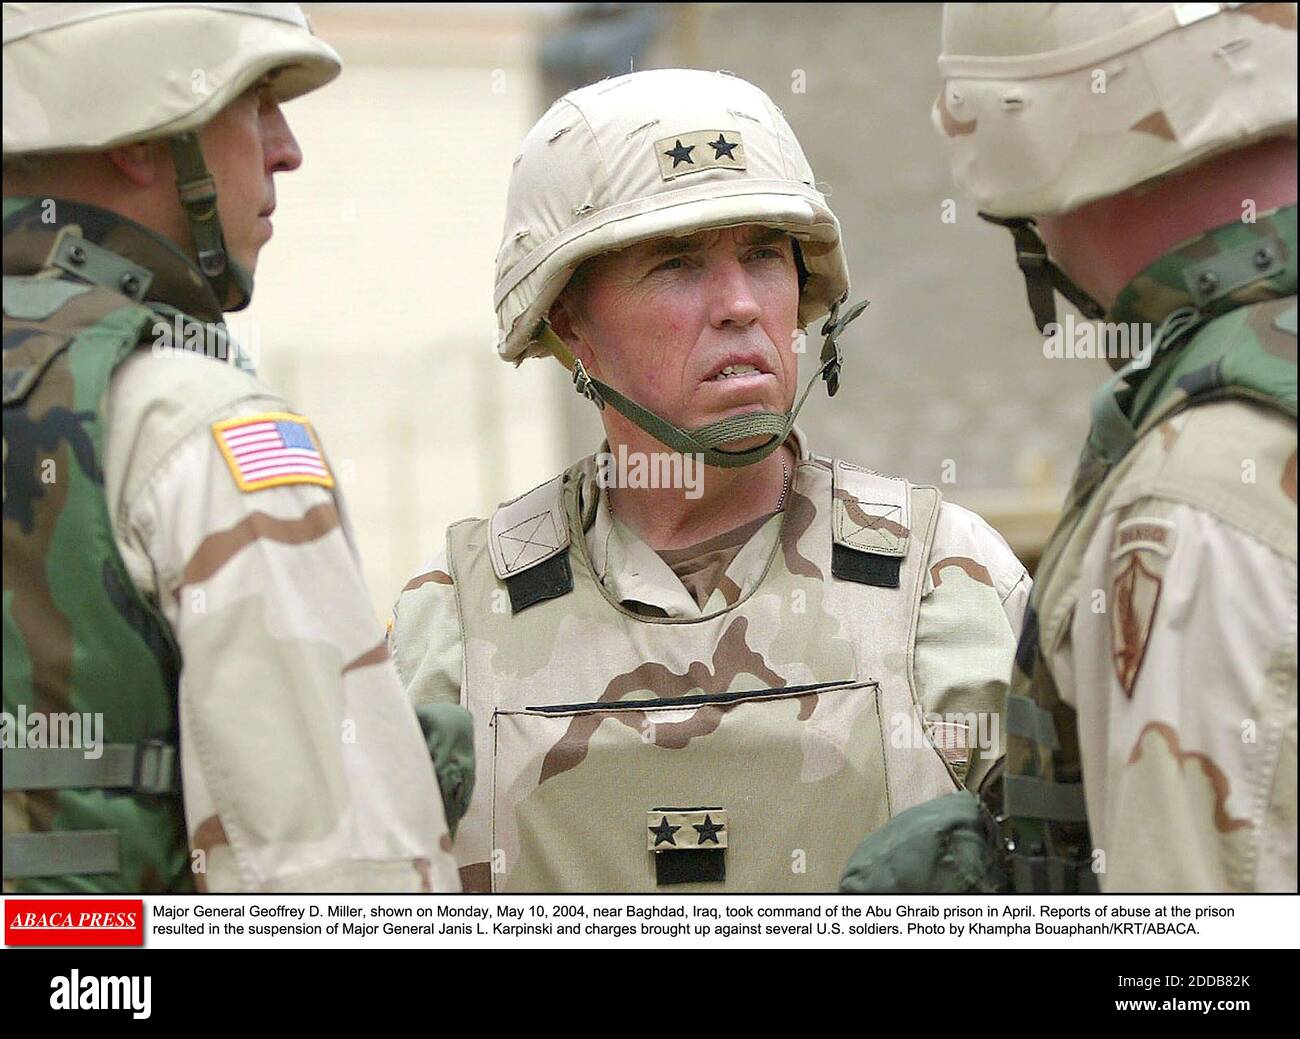 NO FILM, NO VIDEO, NO TV, NO DOCUMENTARY - Major General Geoffrey D. Miller, shown on Monday, May 10, 2004, near Baghdad, Iraq, took command of the Abu Ghraib prison in April. Reports of abuse at the prison resulted in the suspension of Major General Janis L. Karpinski and charges brought up against several U.S. soldiers. Photo by Khampha Bouaphanh/KRT/ABACA. Stock Photo